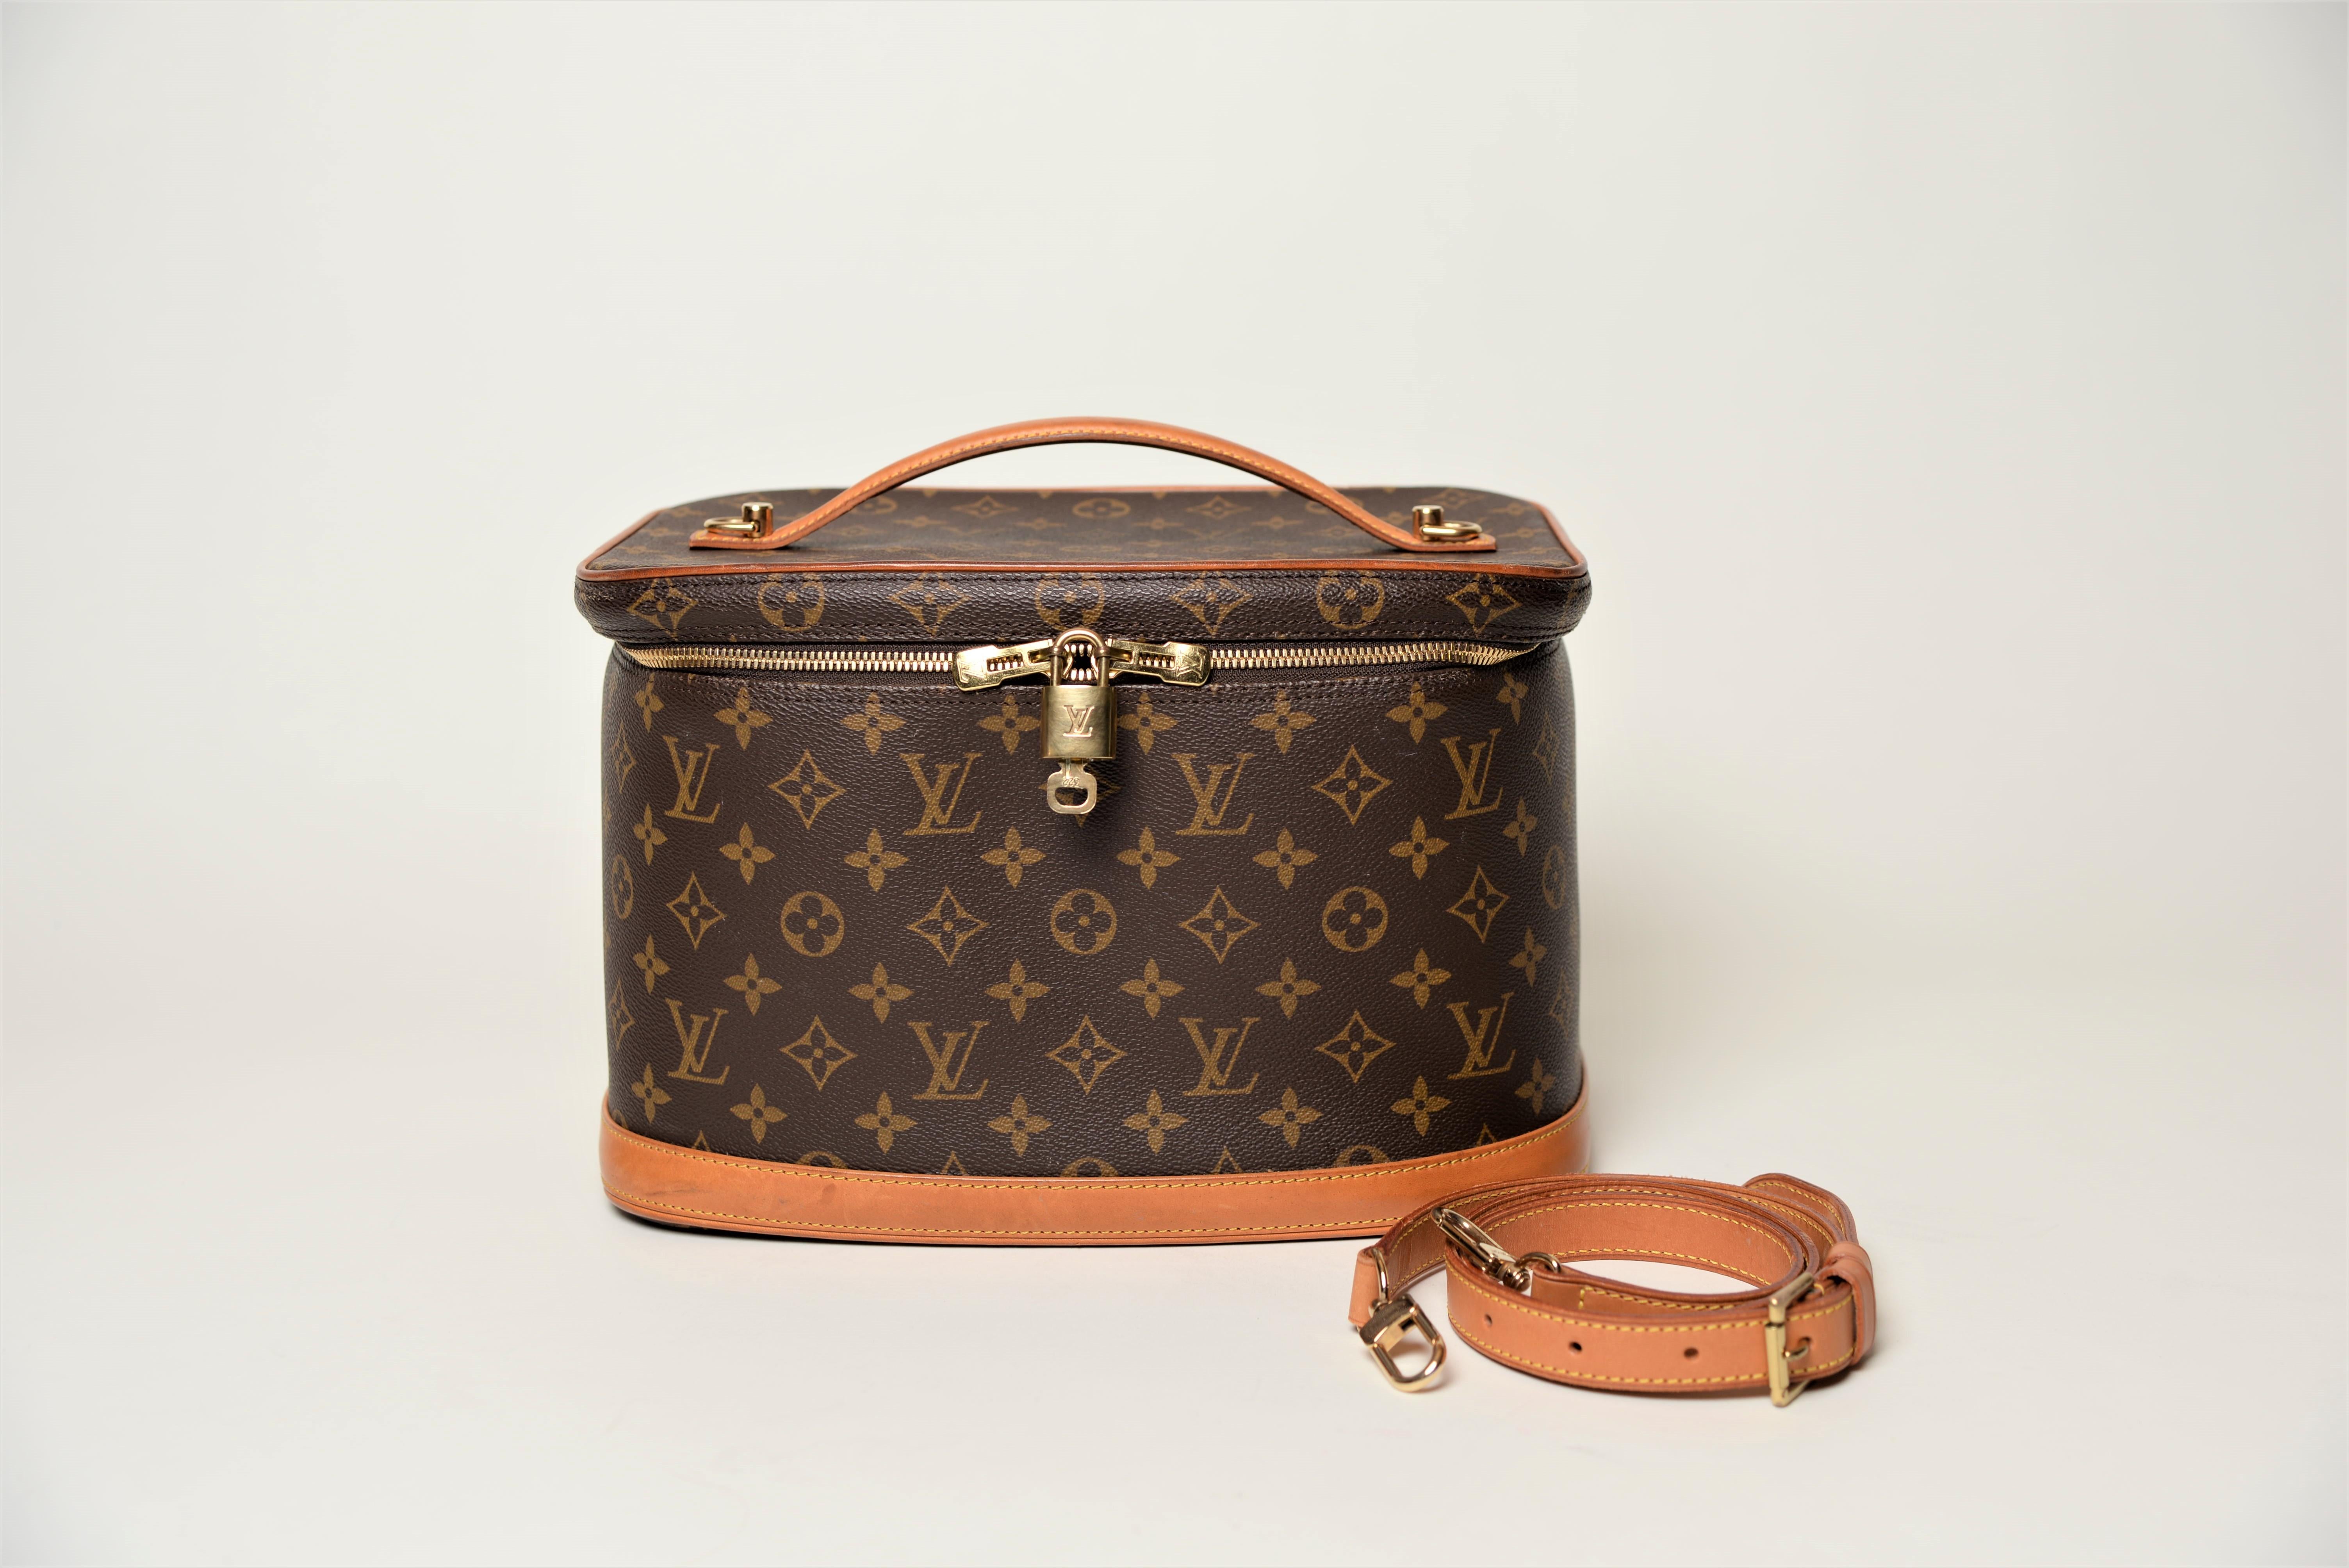 From the collection of SAVINETI we offer this Louis Vuitton Nice Vanity Vcase:
-	Brand: Louis Vuitton
-	Model: Nice Vanity Vcase
-	Year: 1995
-	Condition: Good 
-	Materials: Canvas, Leather
-	Extras: comes with a strap 

We at Savineti sell rare and